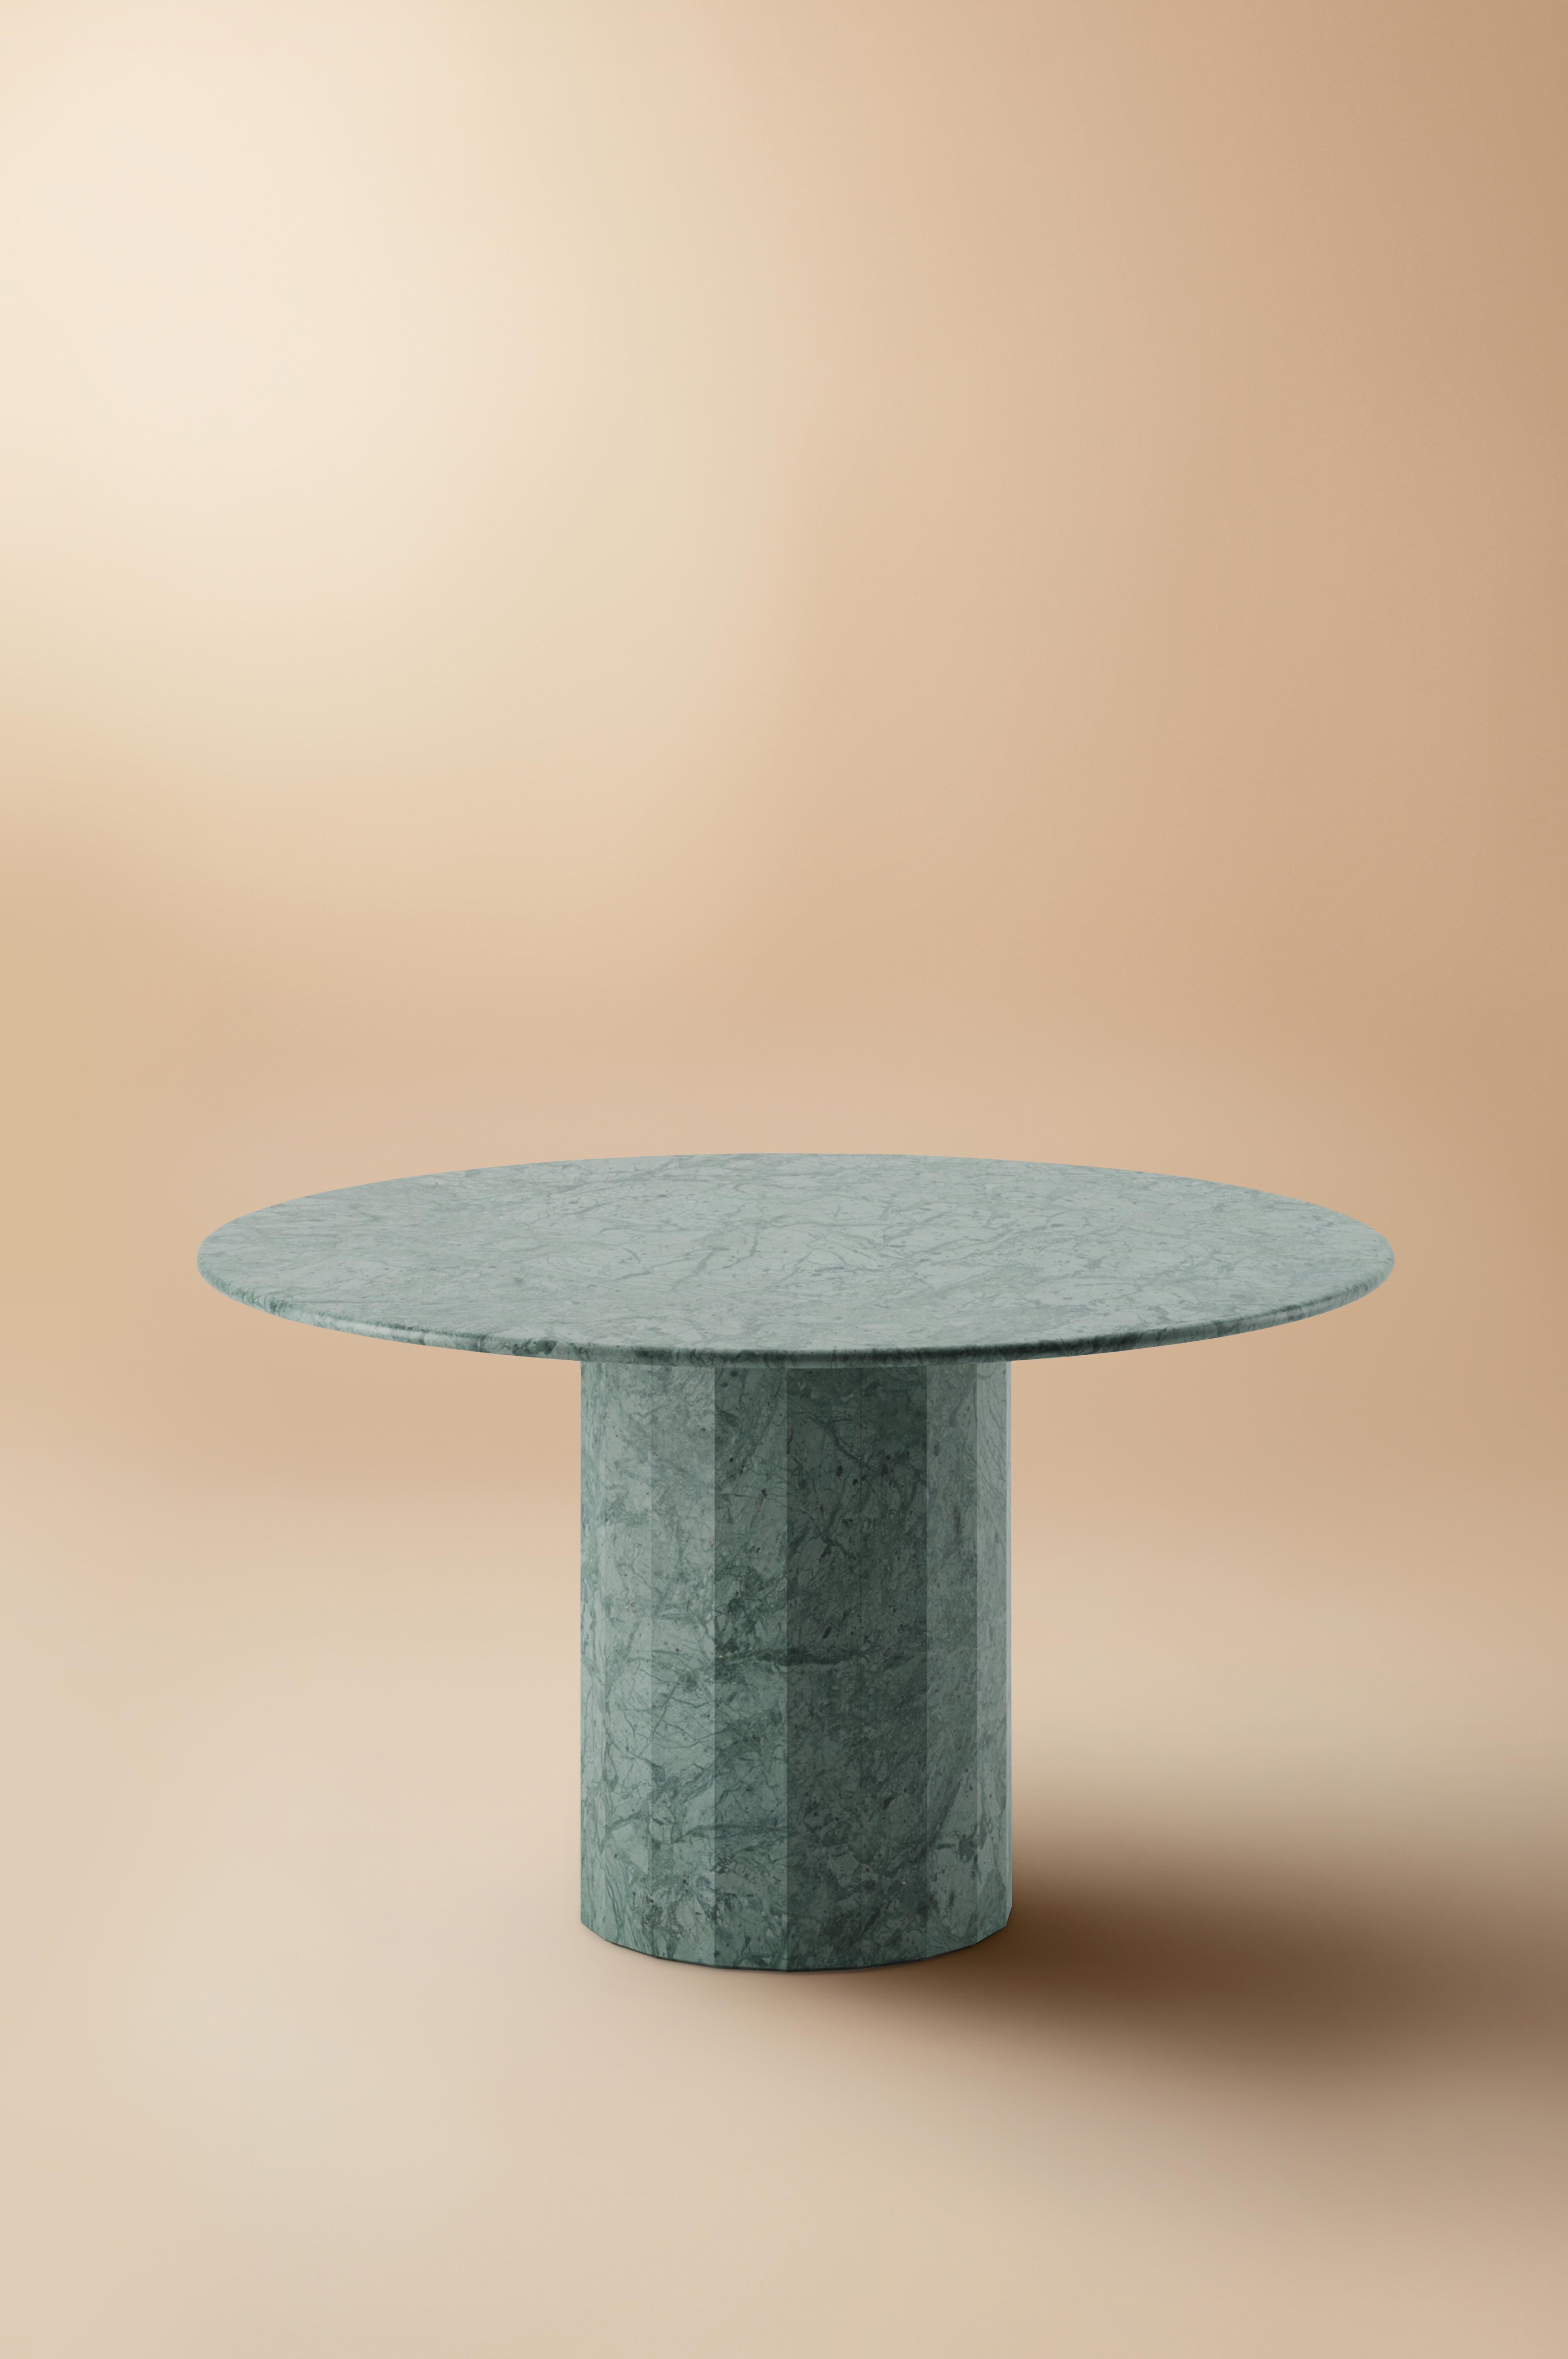 The Ashby marble round dining table is evidence of Lemon’s journey into increasing simplicity. With a design cued entirely by honed Verde Guatemala marble, its round slim top is countered by a strong faceted base – an intentional and definitive